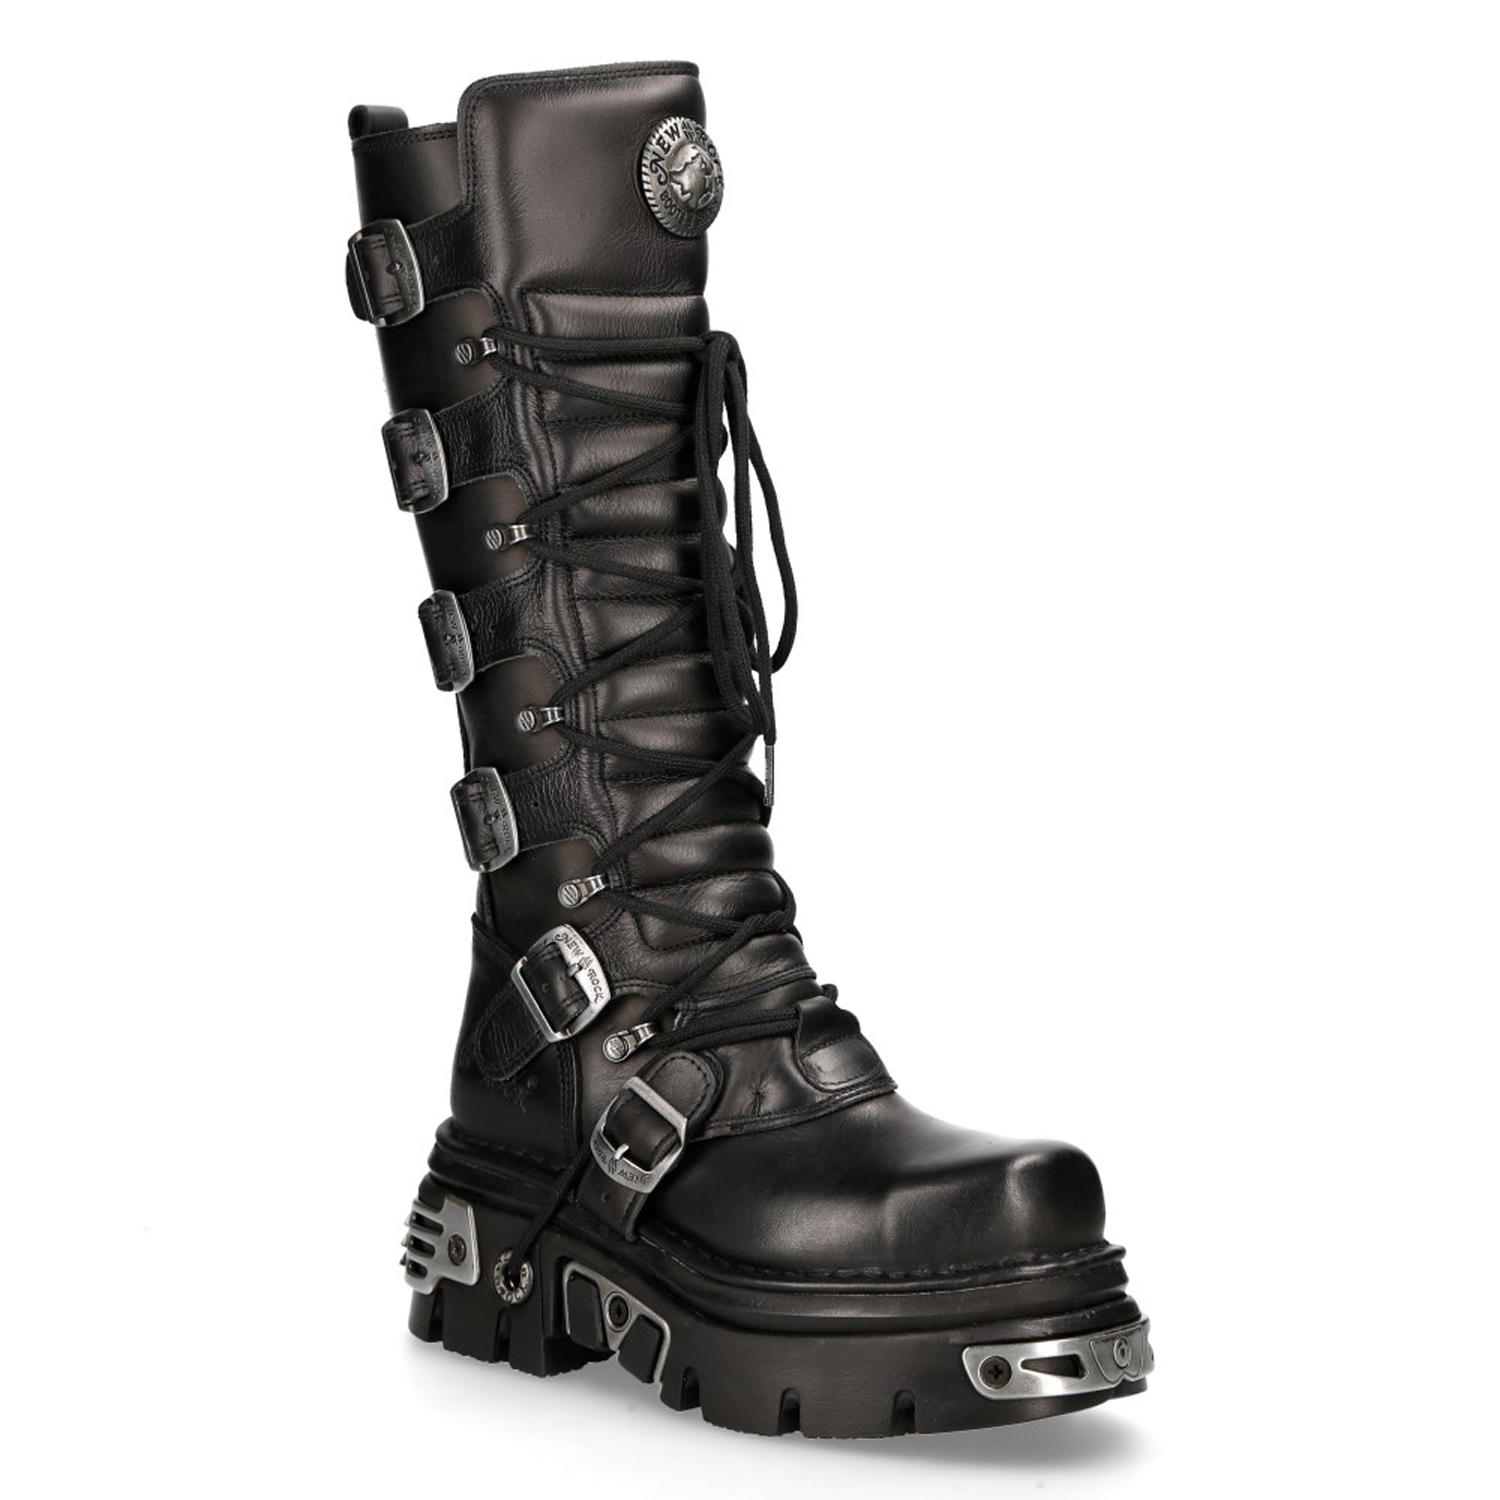 Black Leather New Rock Metallic Metal Toe High Boots M.272MT-S1 • the ...